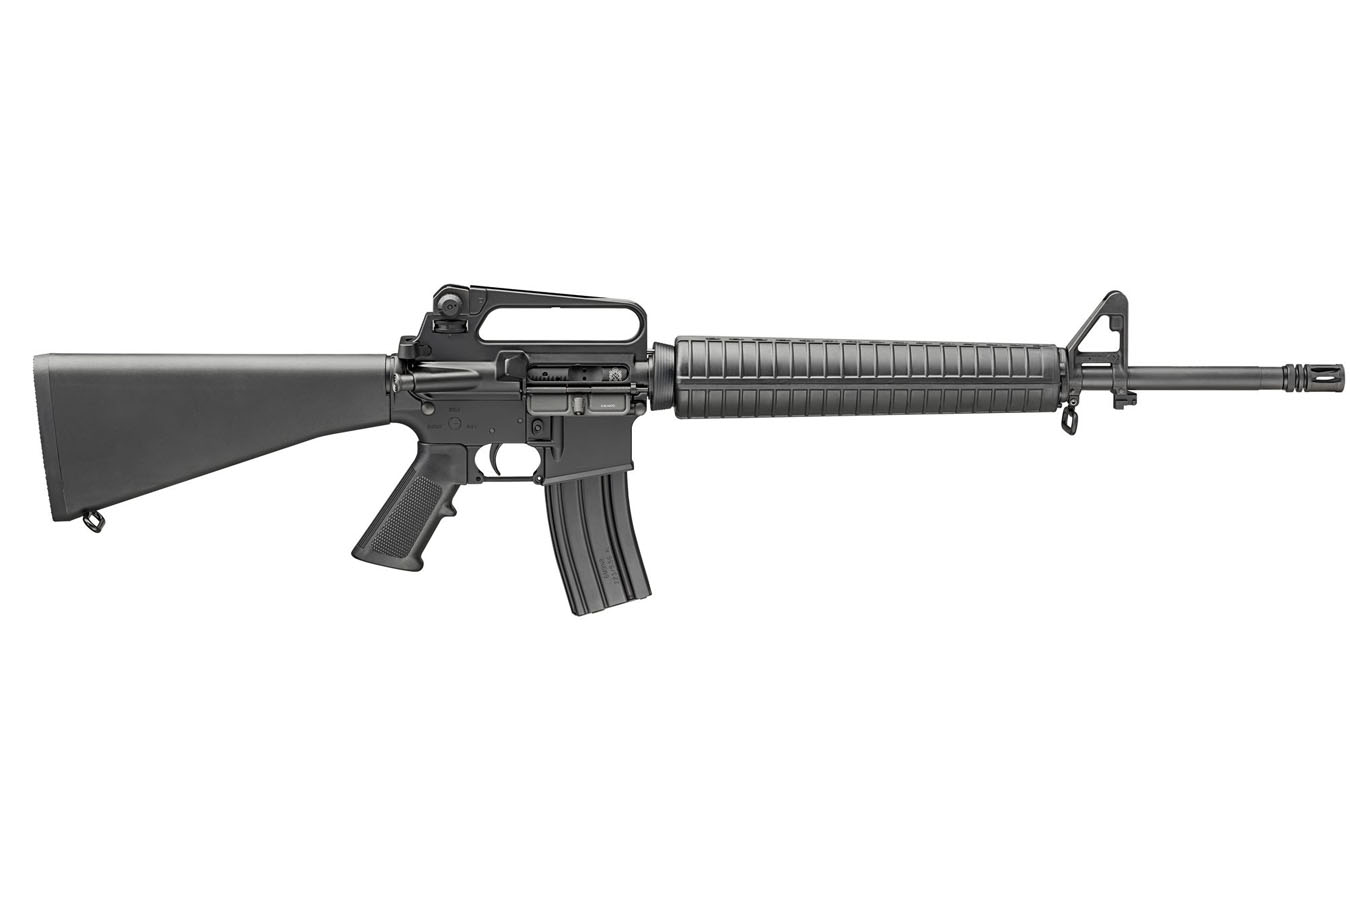 SPRINGFIELD SA-16A2 5.56mm Semi-Automatic Rifle with Carry Handle, Fixed Stock and 20 Inch Chrome-Lined Barrel